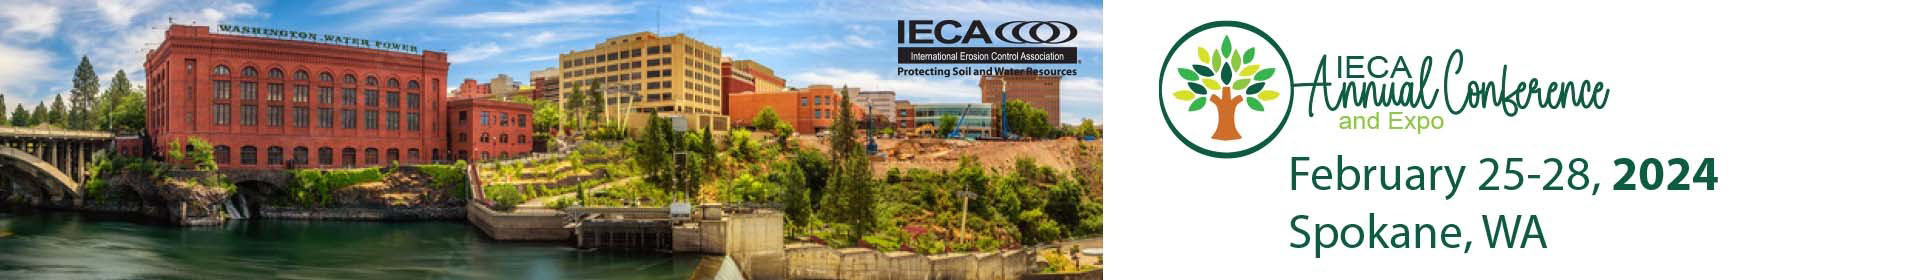 2024 IECA Annual Conference & Expo Event Banner